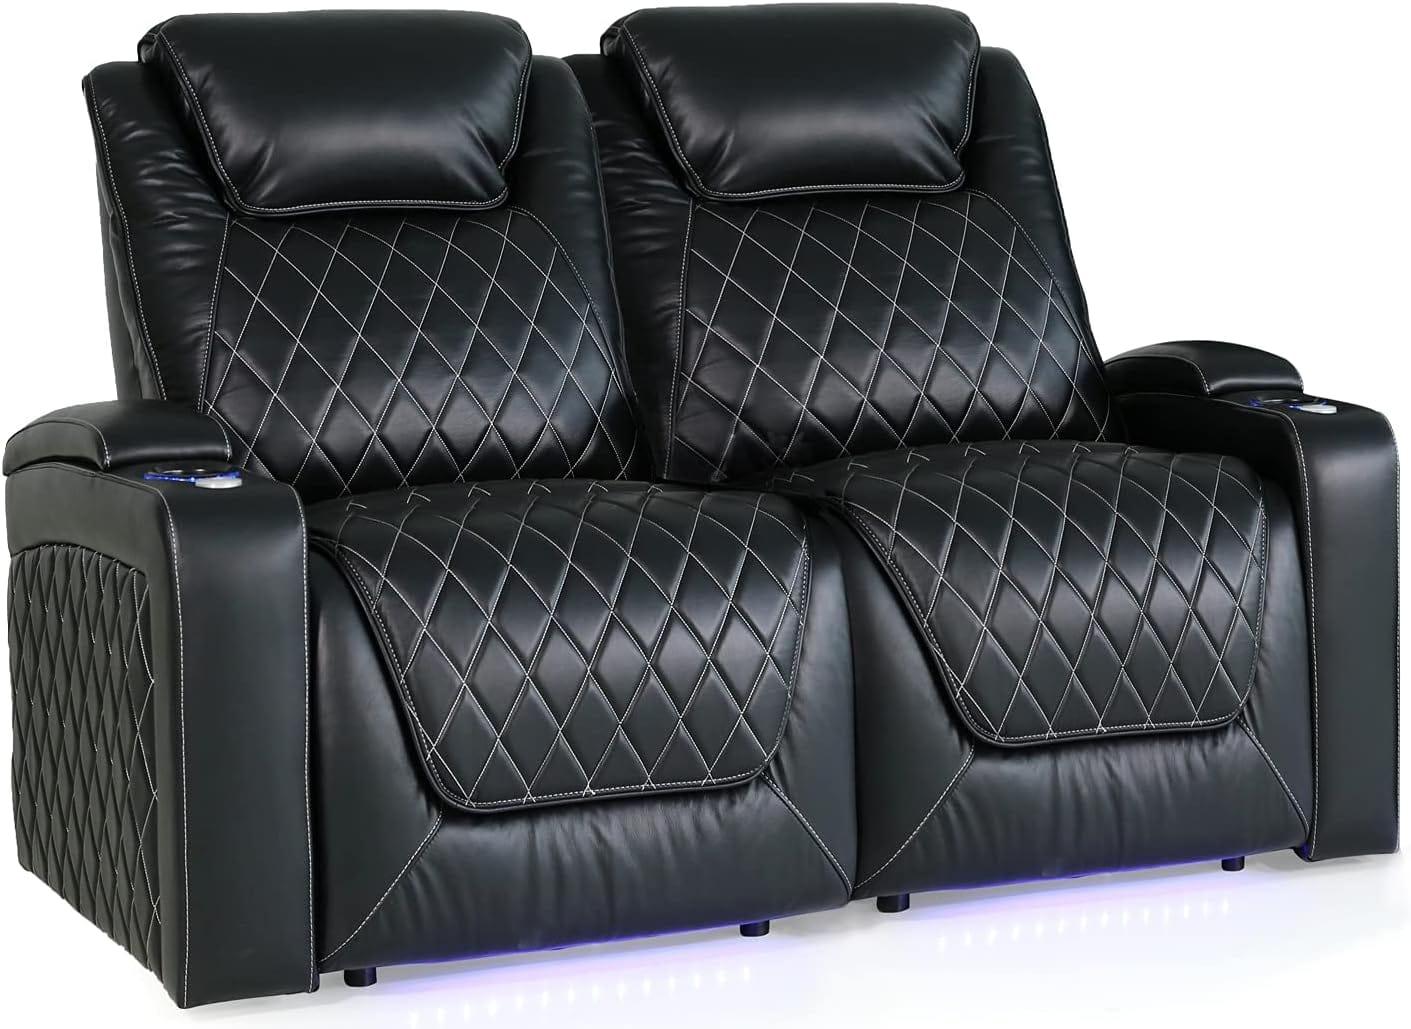 by Valencia Seating Sofa Row of 2 - Loveseat | Width: 65" Height: 45" Depth: 38" / MIdnight Black / Regular Spec (300 LBs Sitting Weight Limit) Valencia Oslo XL Home Theater Seating